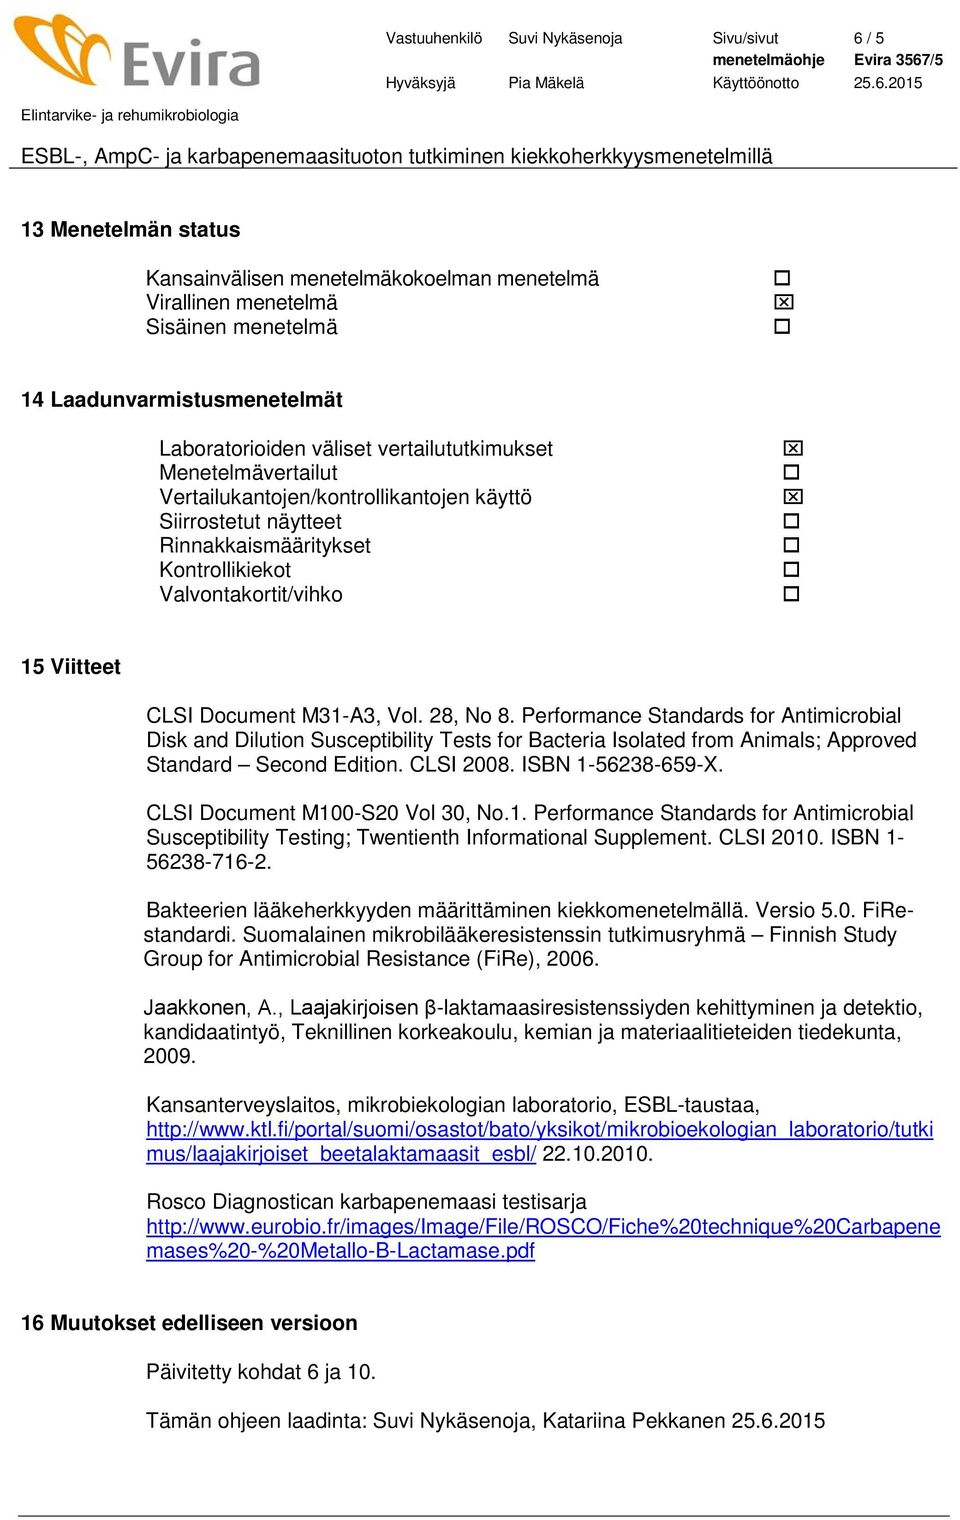 M31-A3, Vol. 28, No 8. Performance Standards for Antimicrobial Disk and Dilution Susceptibility Tests for Bacteria Isolated from Animals; Approved Standard Second Edition. CLSI 2008.